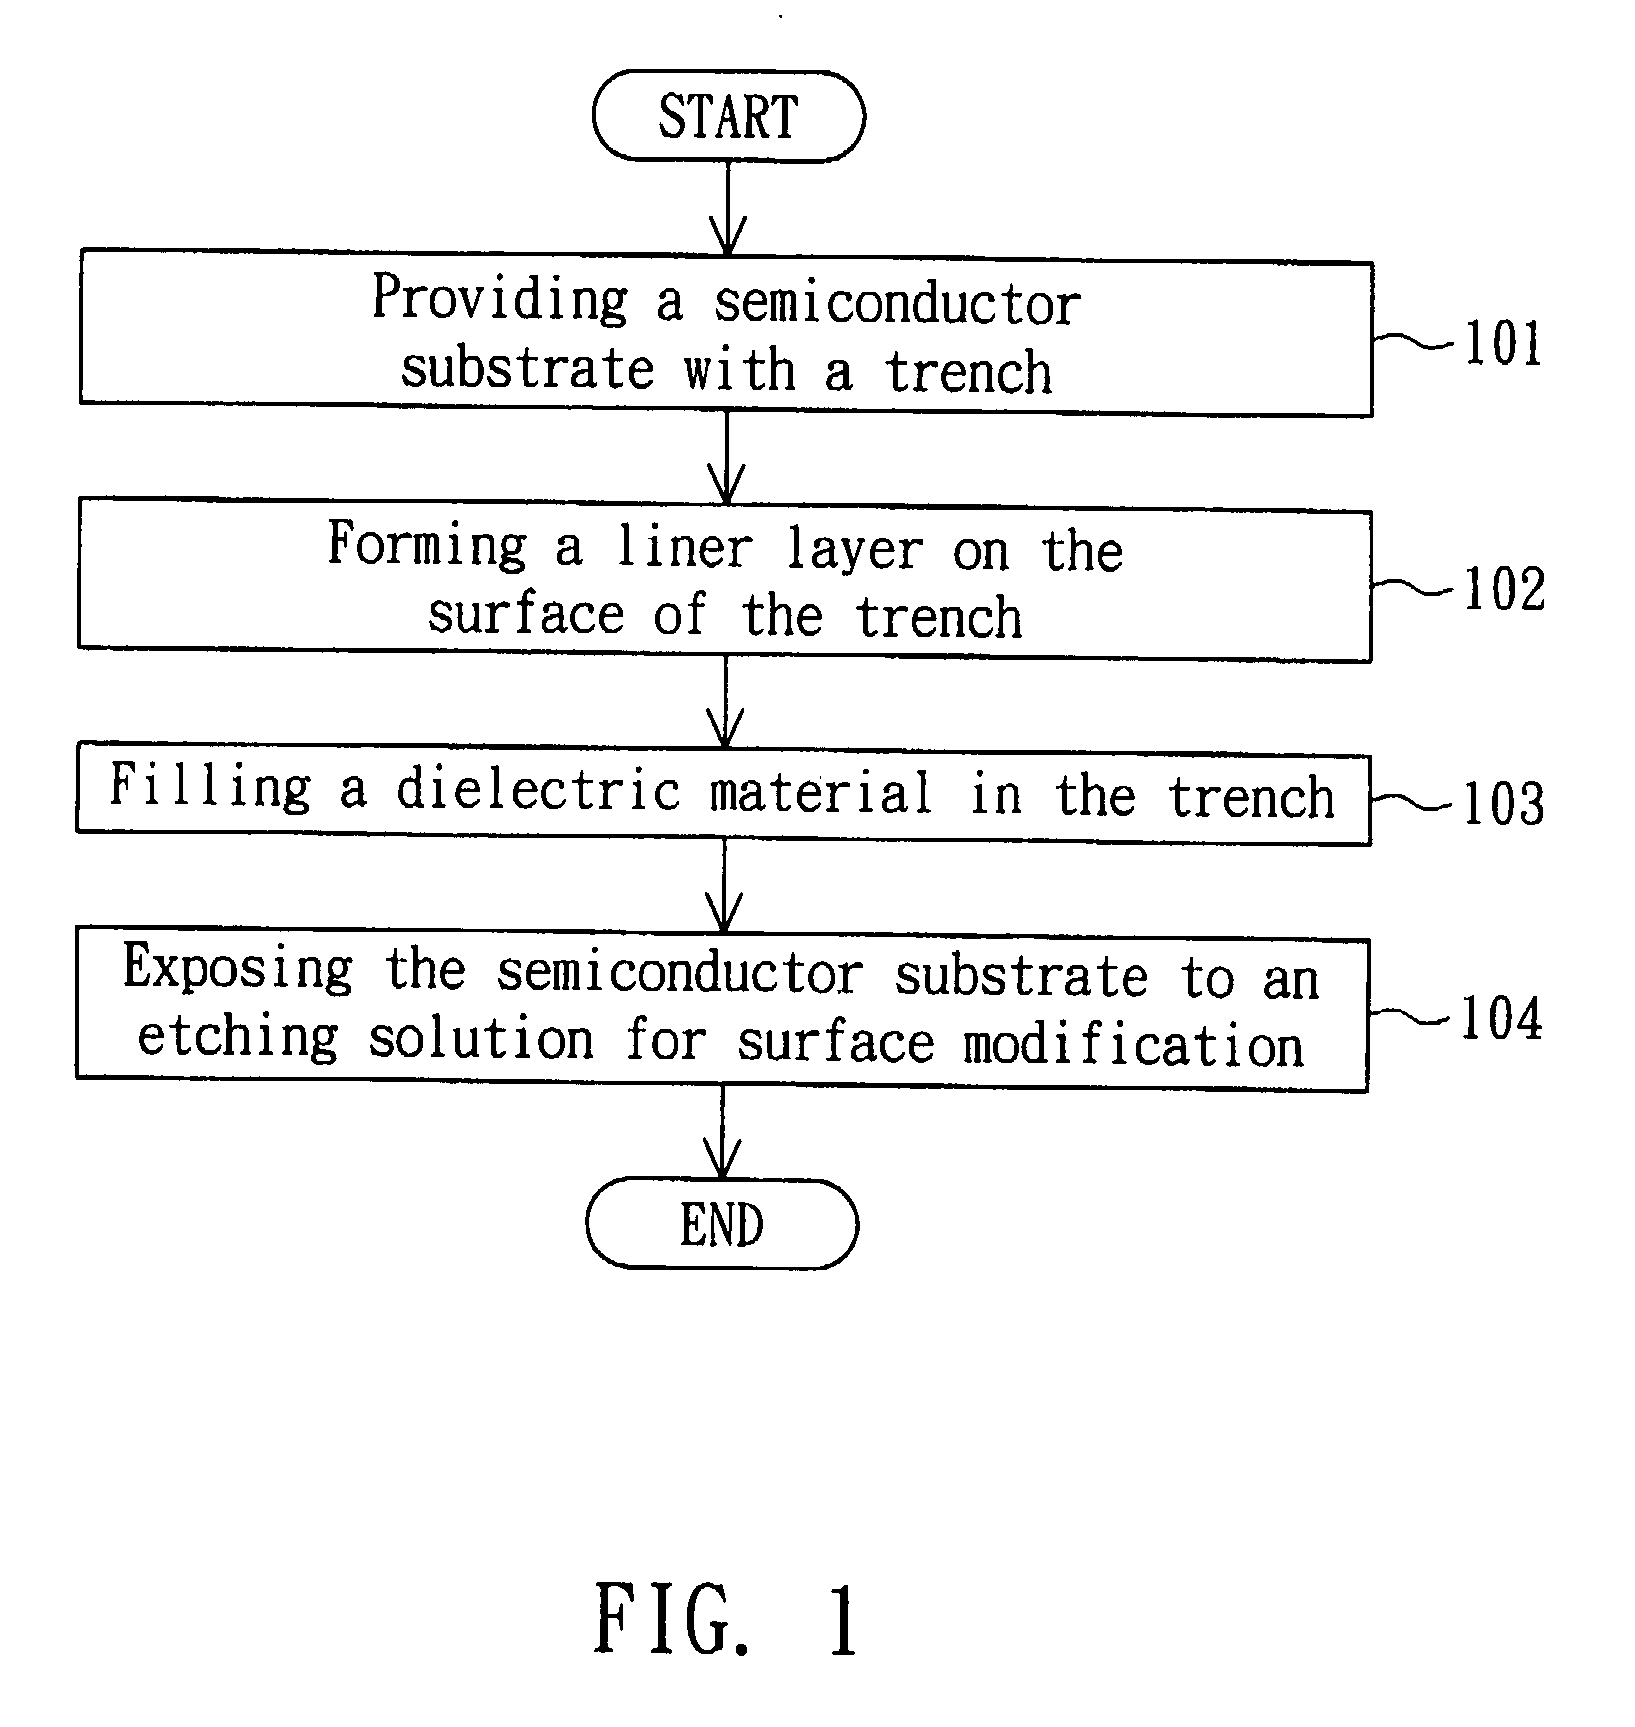 Etching solution, method of surface modification of semiconductor substrate and method of forming shallow trench isolation